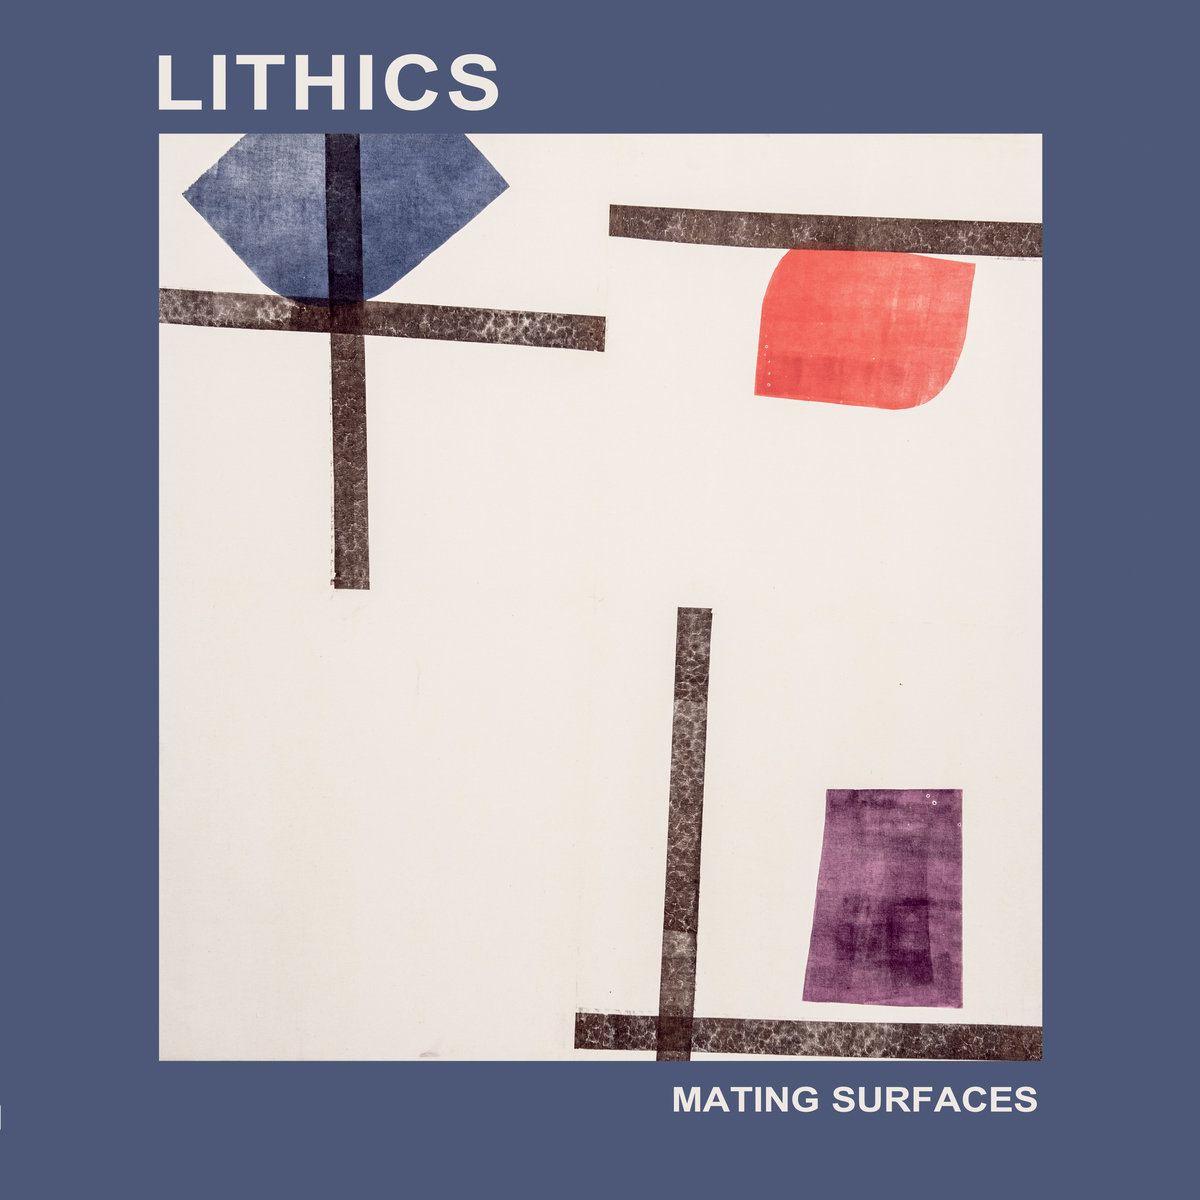 What Happens When the Cerebral Meets the Id Uptown – LITHICS’ “Mating Surfaces”